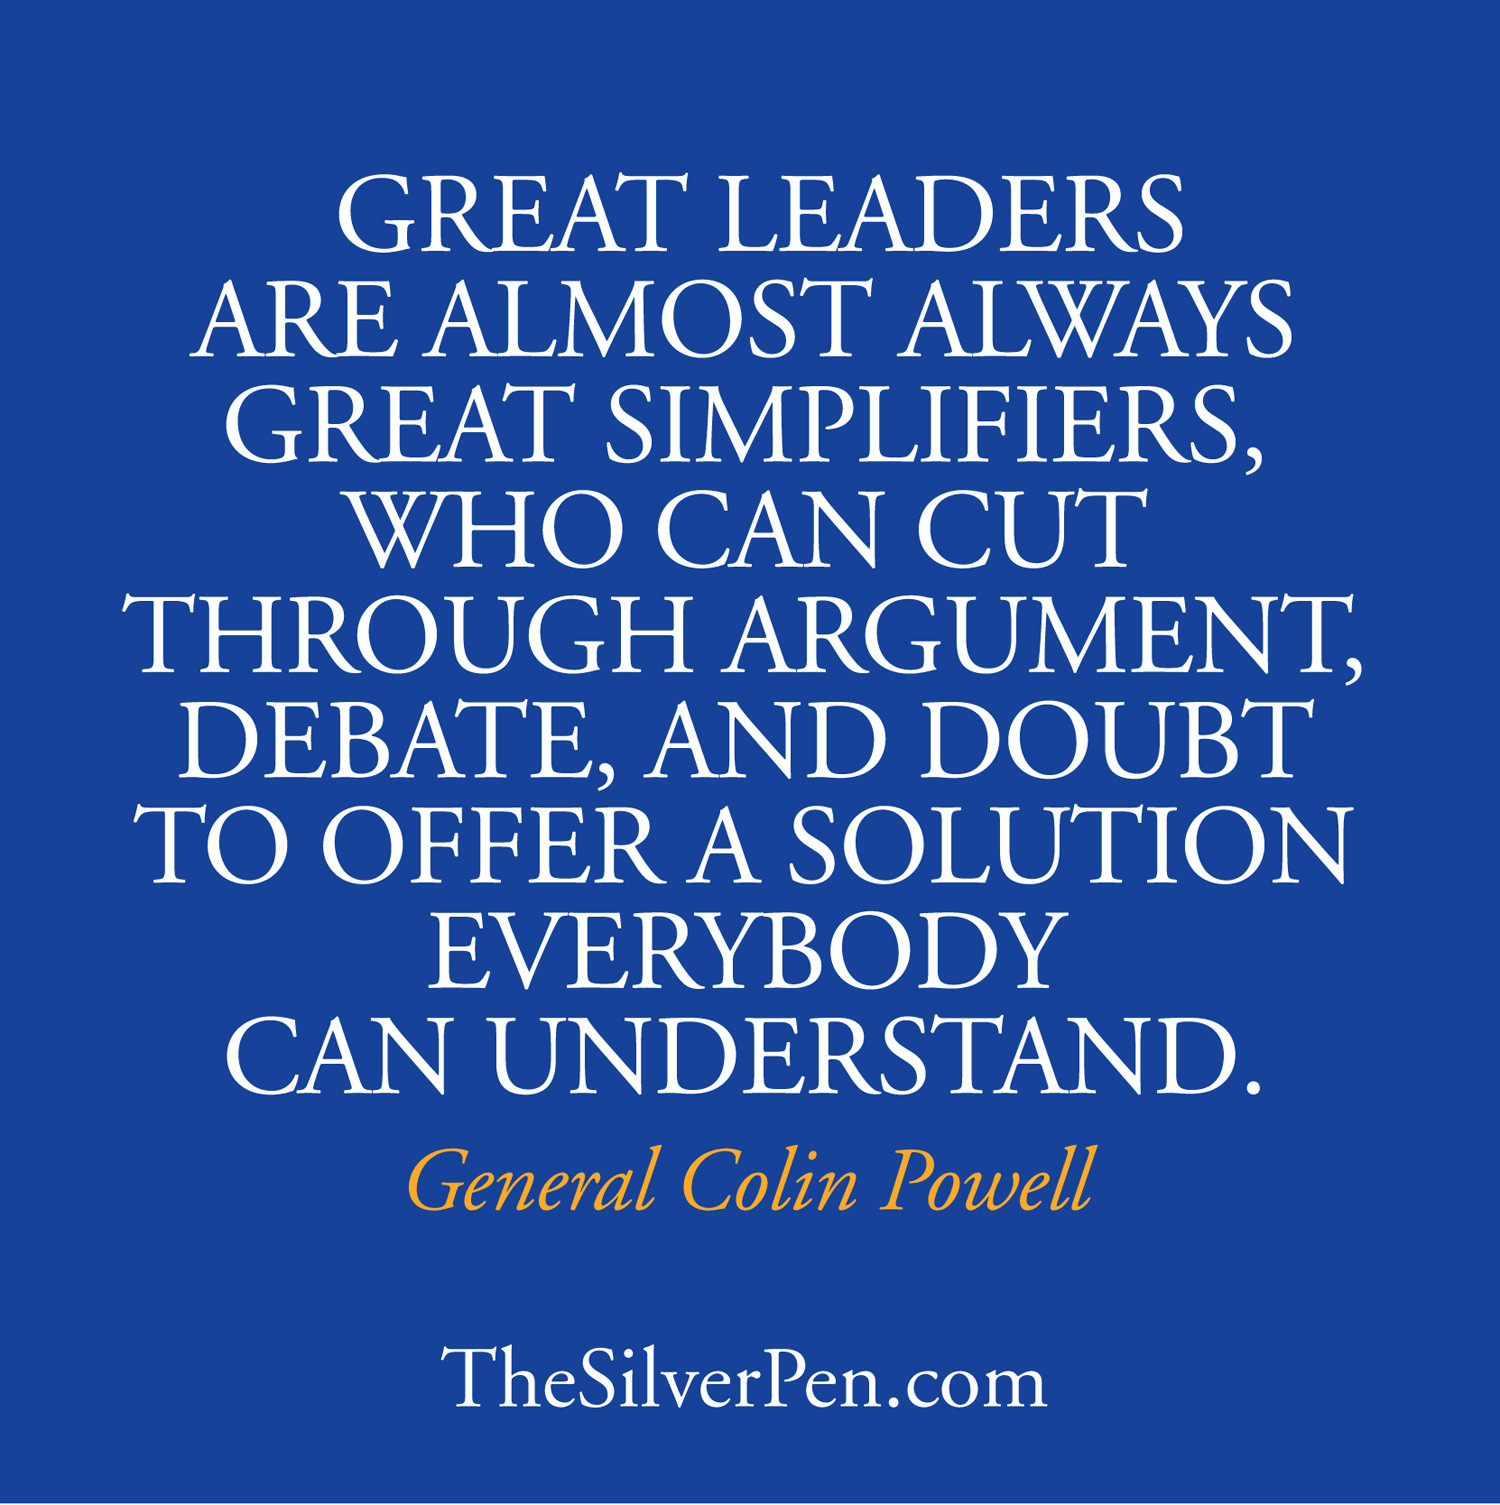 Colin Powell Quotes Leadership
 Great Leaders are Great Simplifiers TheSilverPen